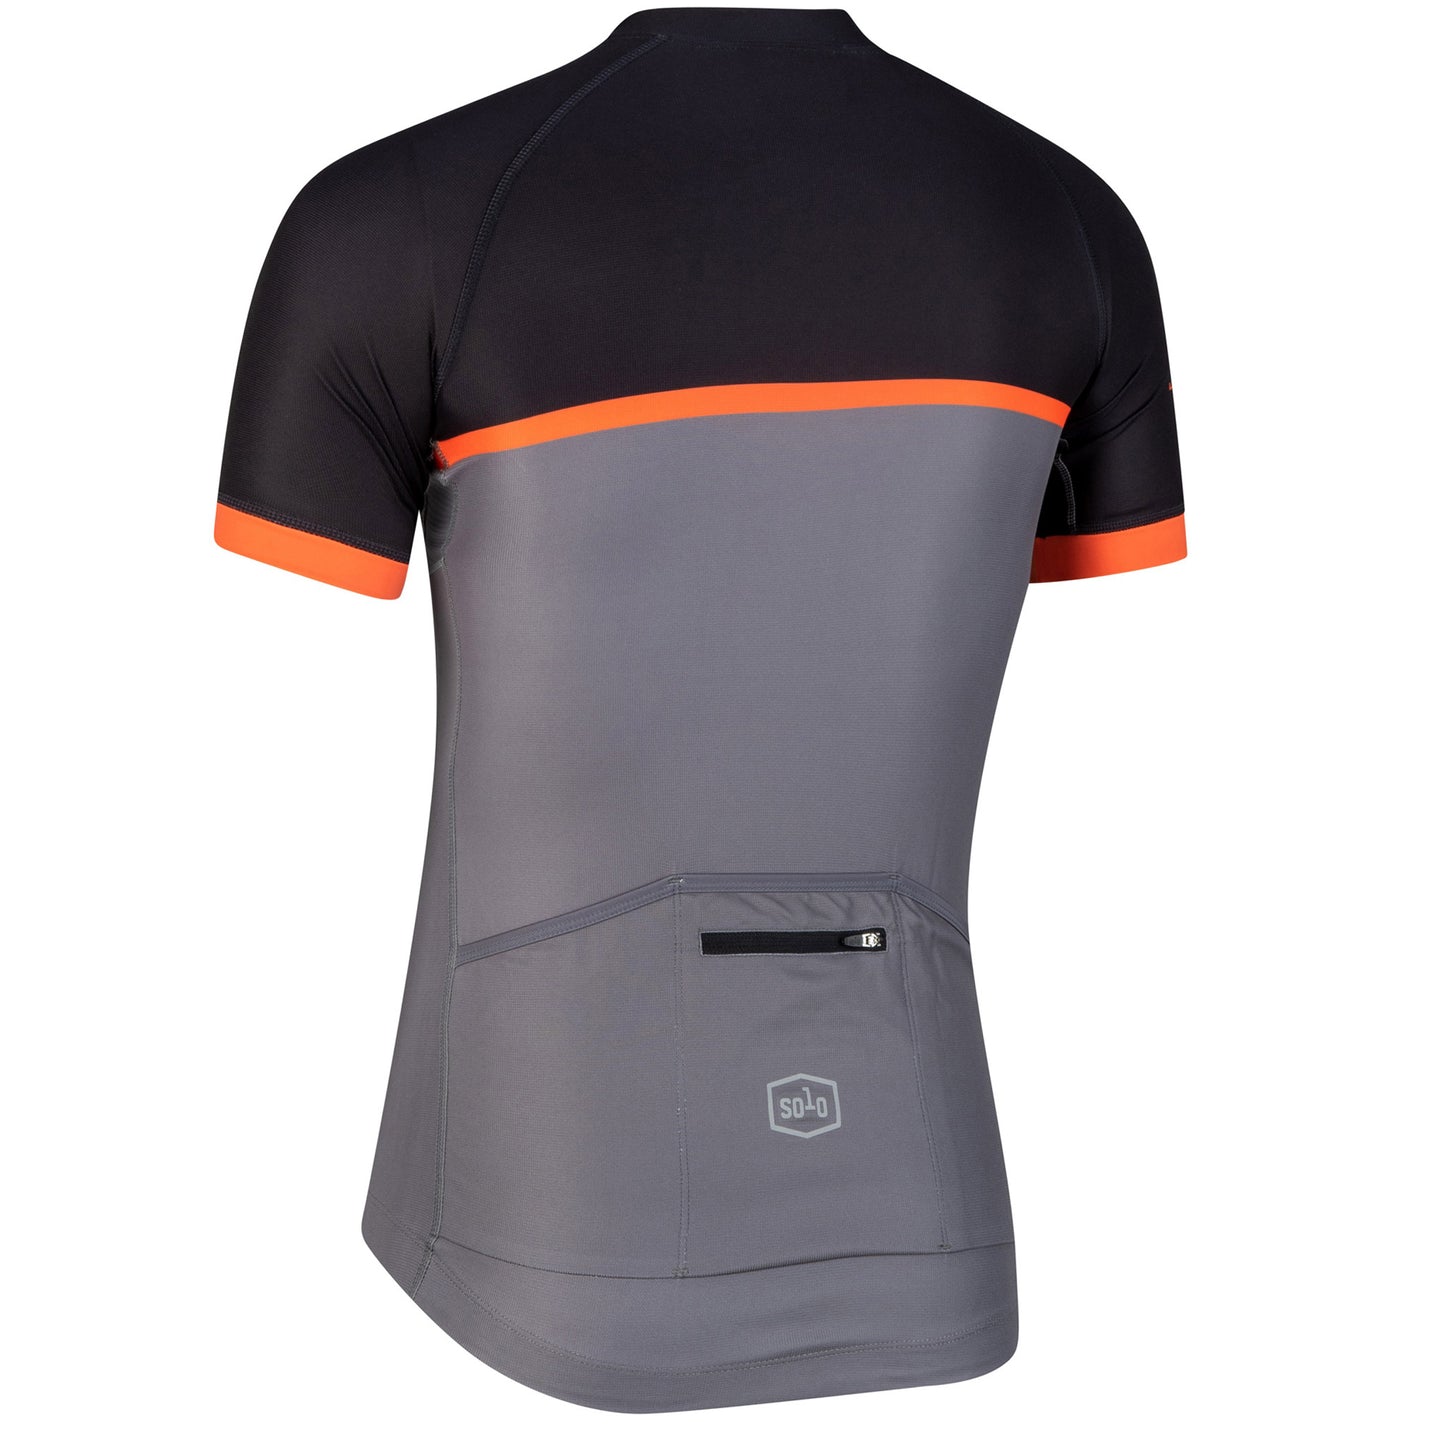 Solo Mens Cadence Jersey, Black/Orange, buy online at Woolys Wheels with free delivery